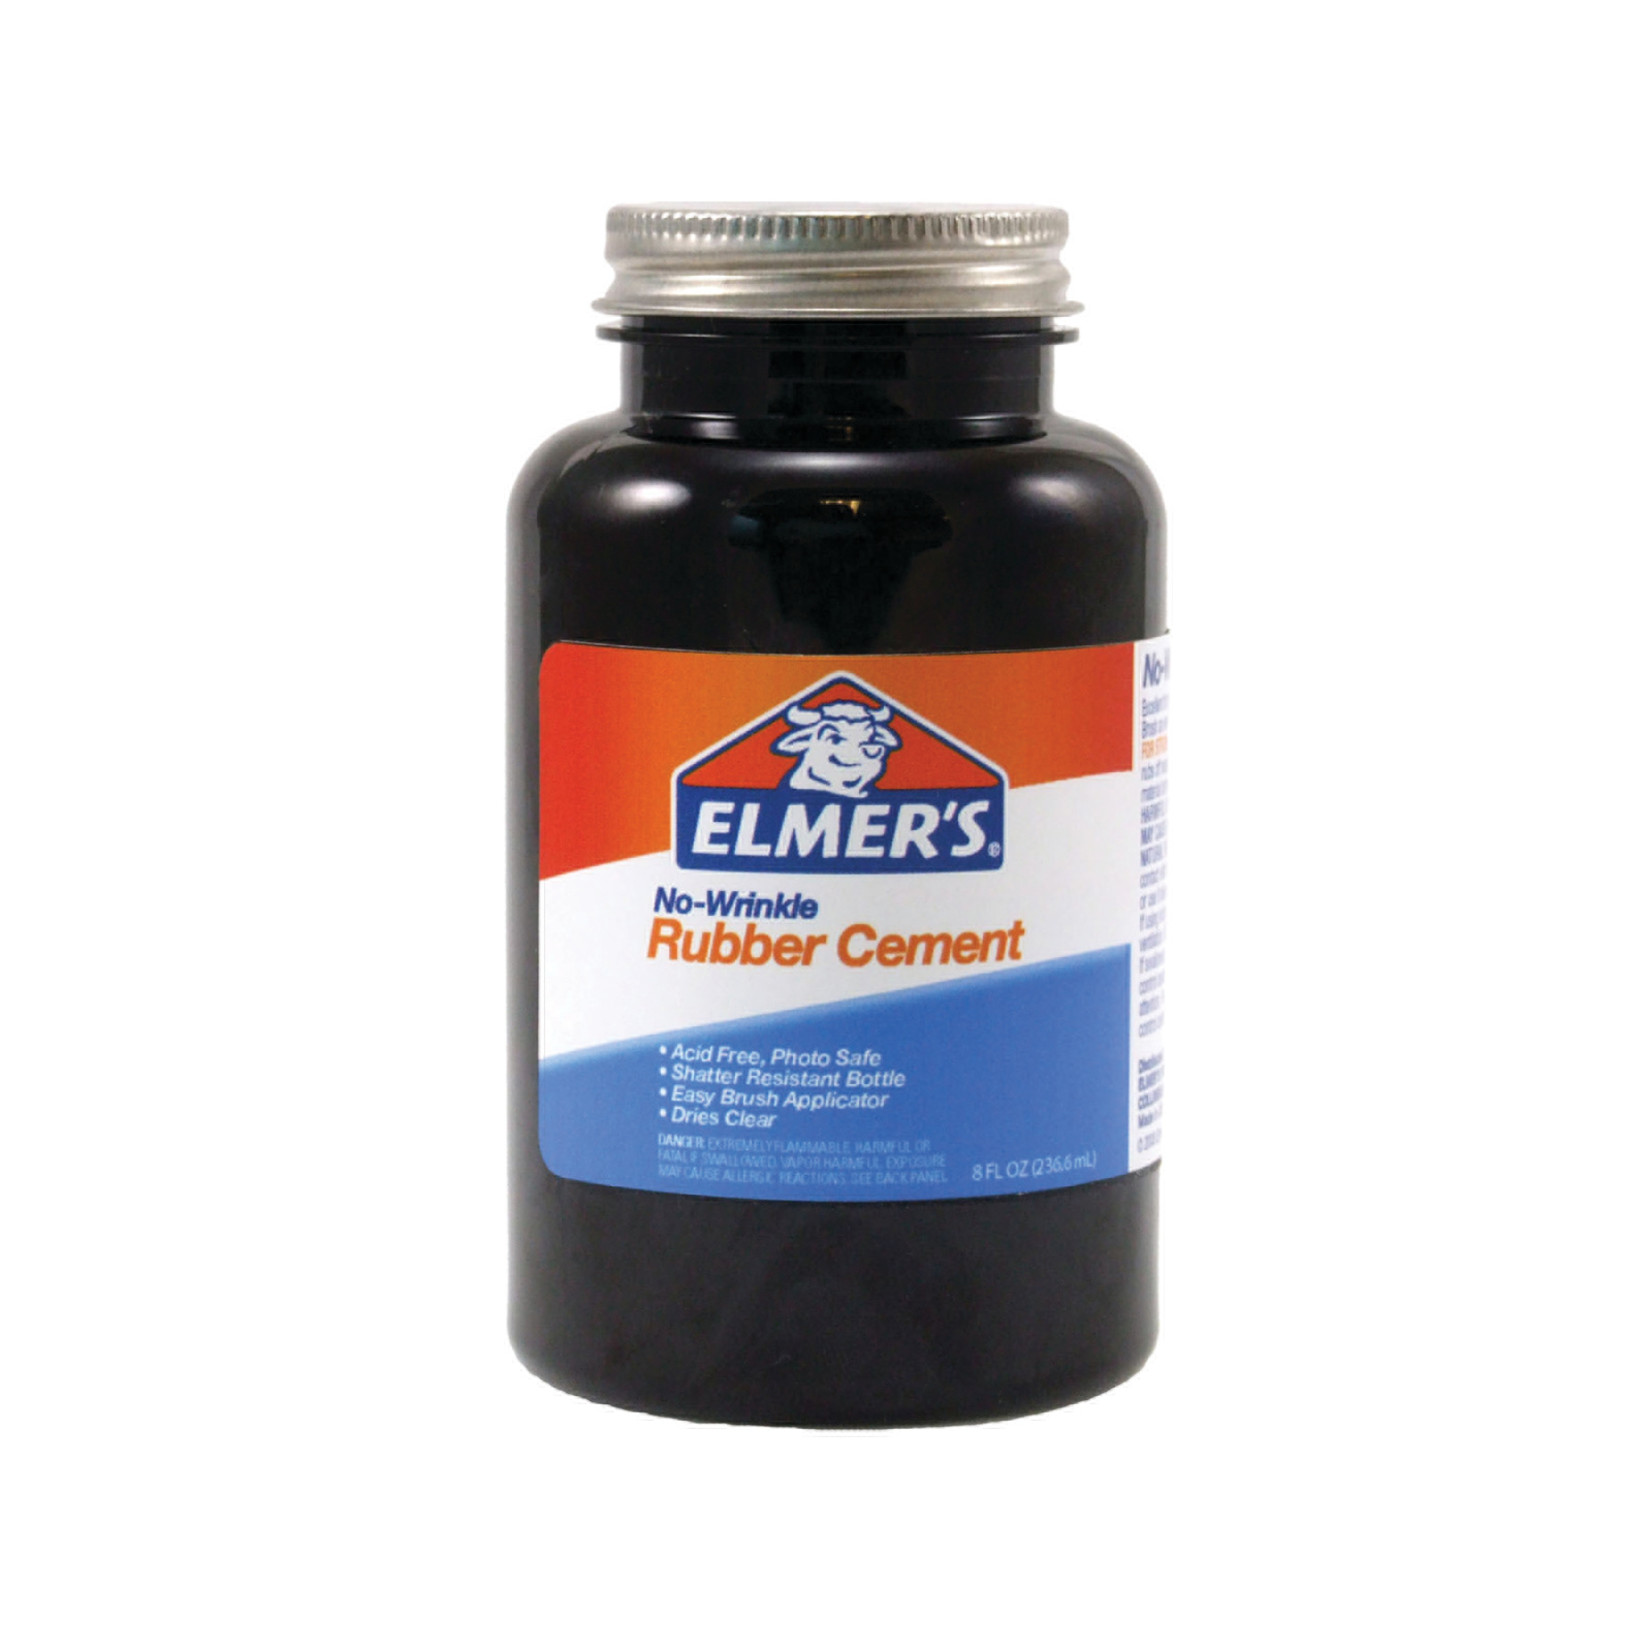 ELMERS ELMERS NO WRINKLE RUBBER CEMENT 4OZ WITH BRUSH